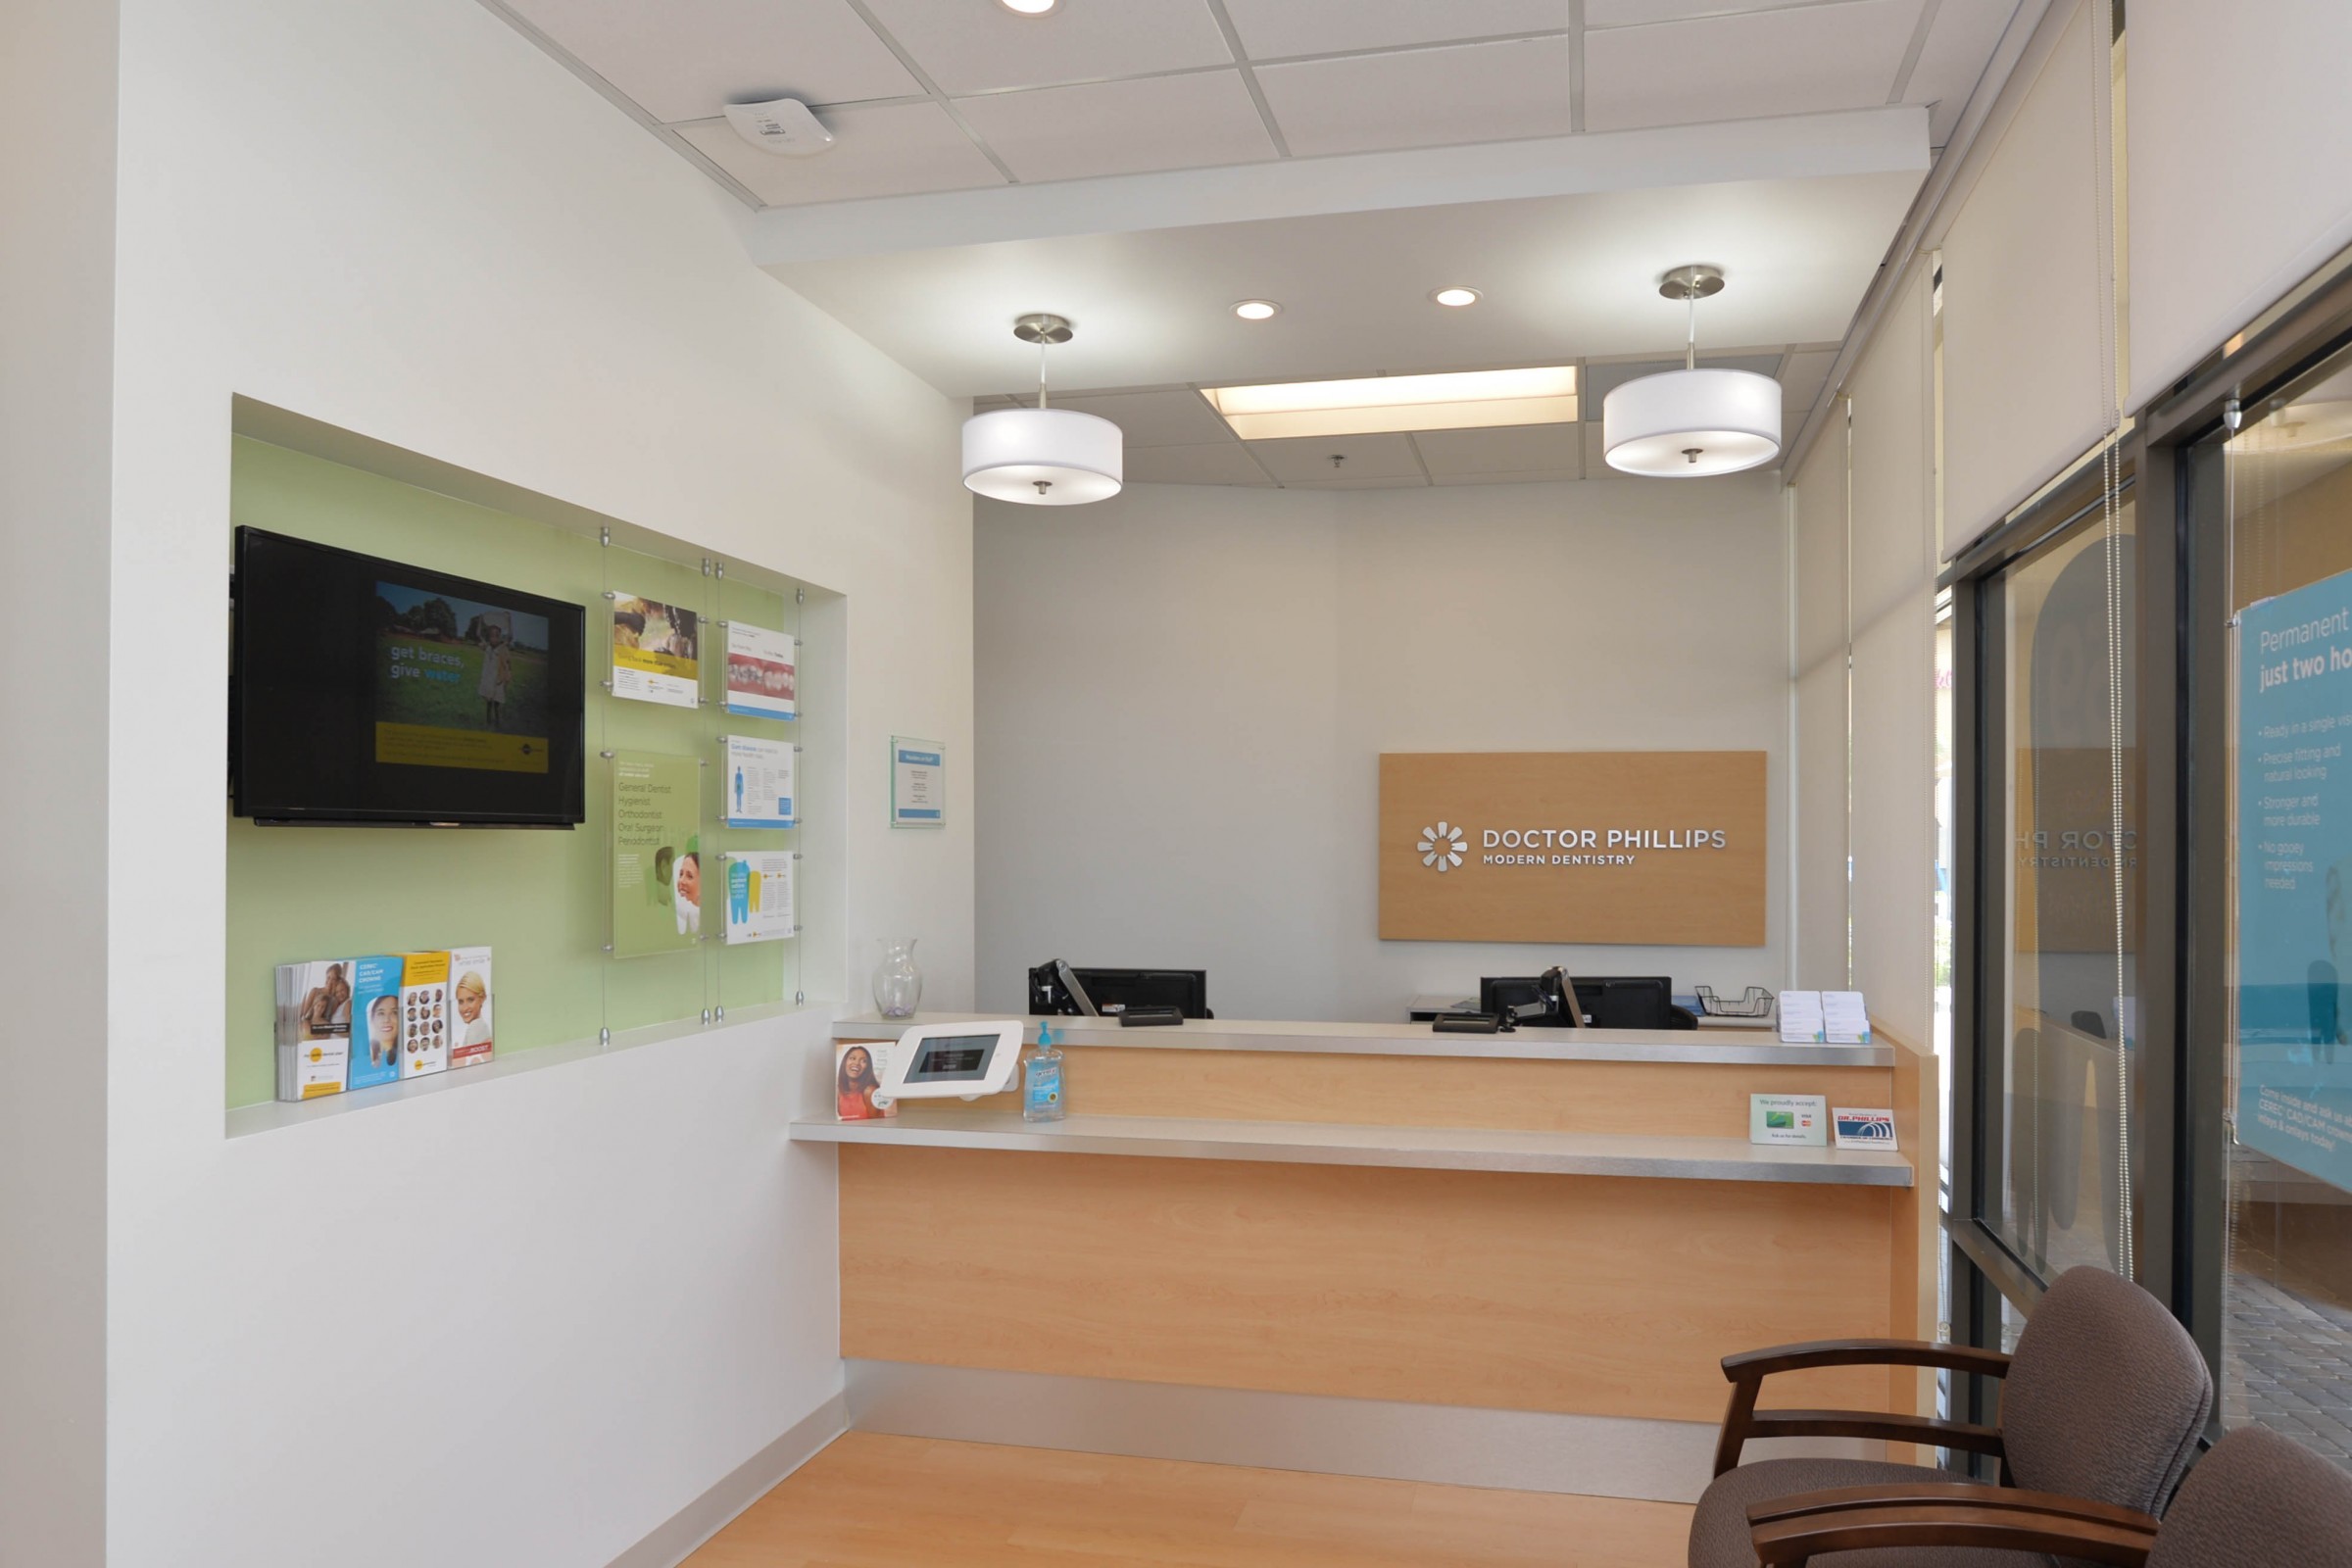 Doctor Phillips Modern Dentistry opened its doors to the Orlando community in July 2016.